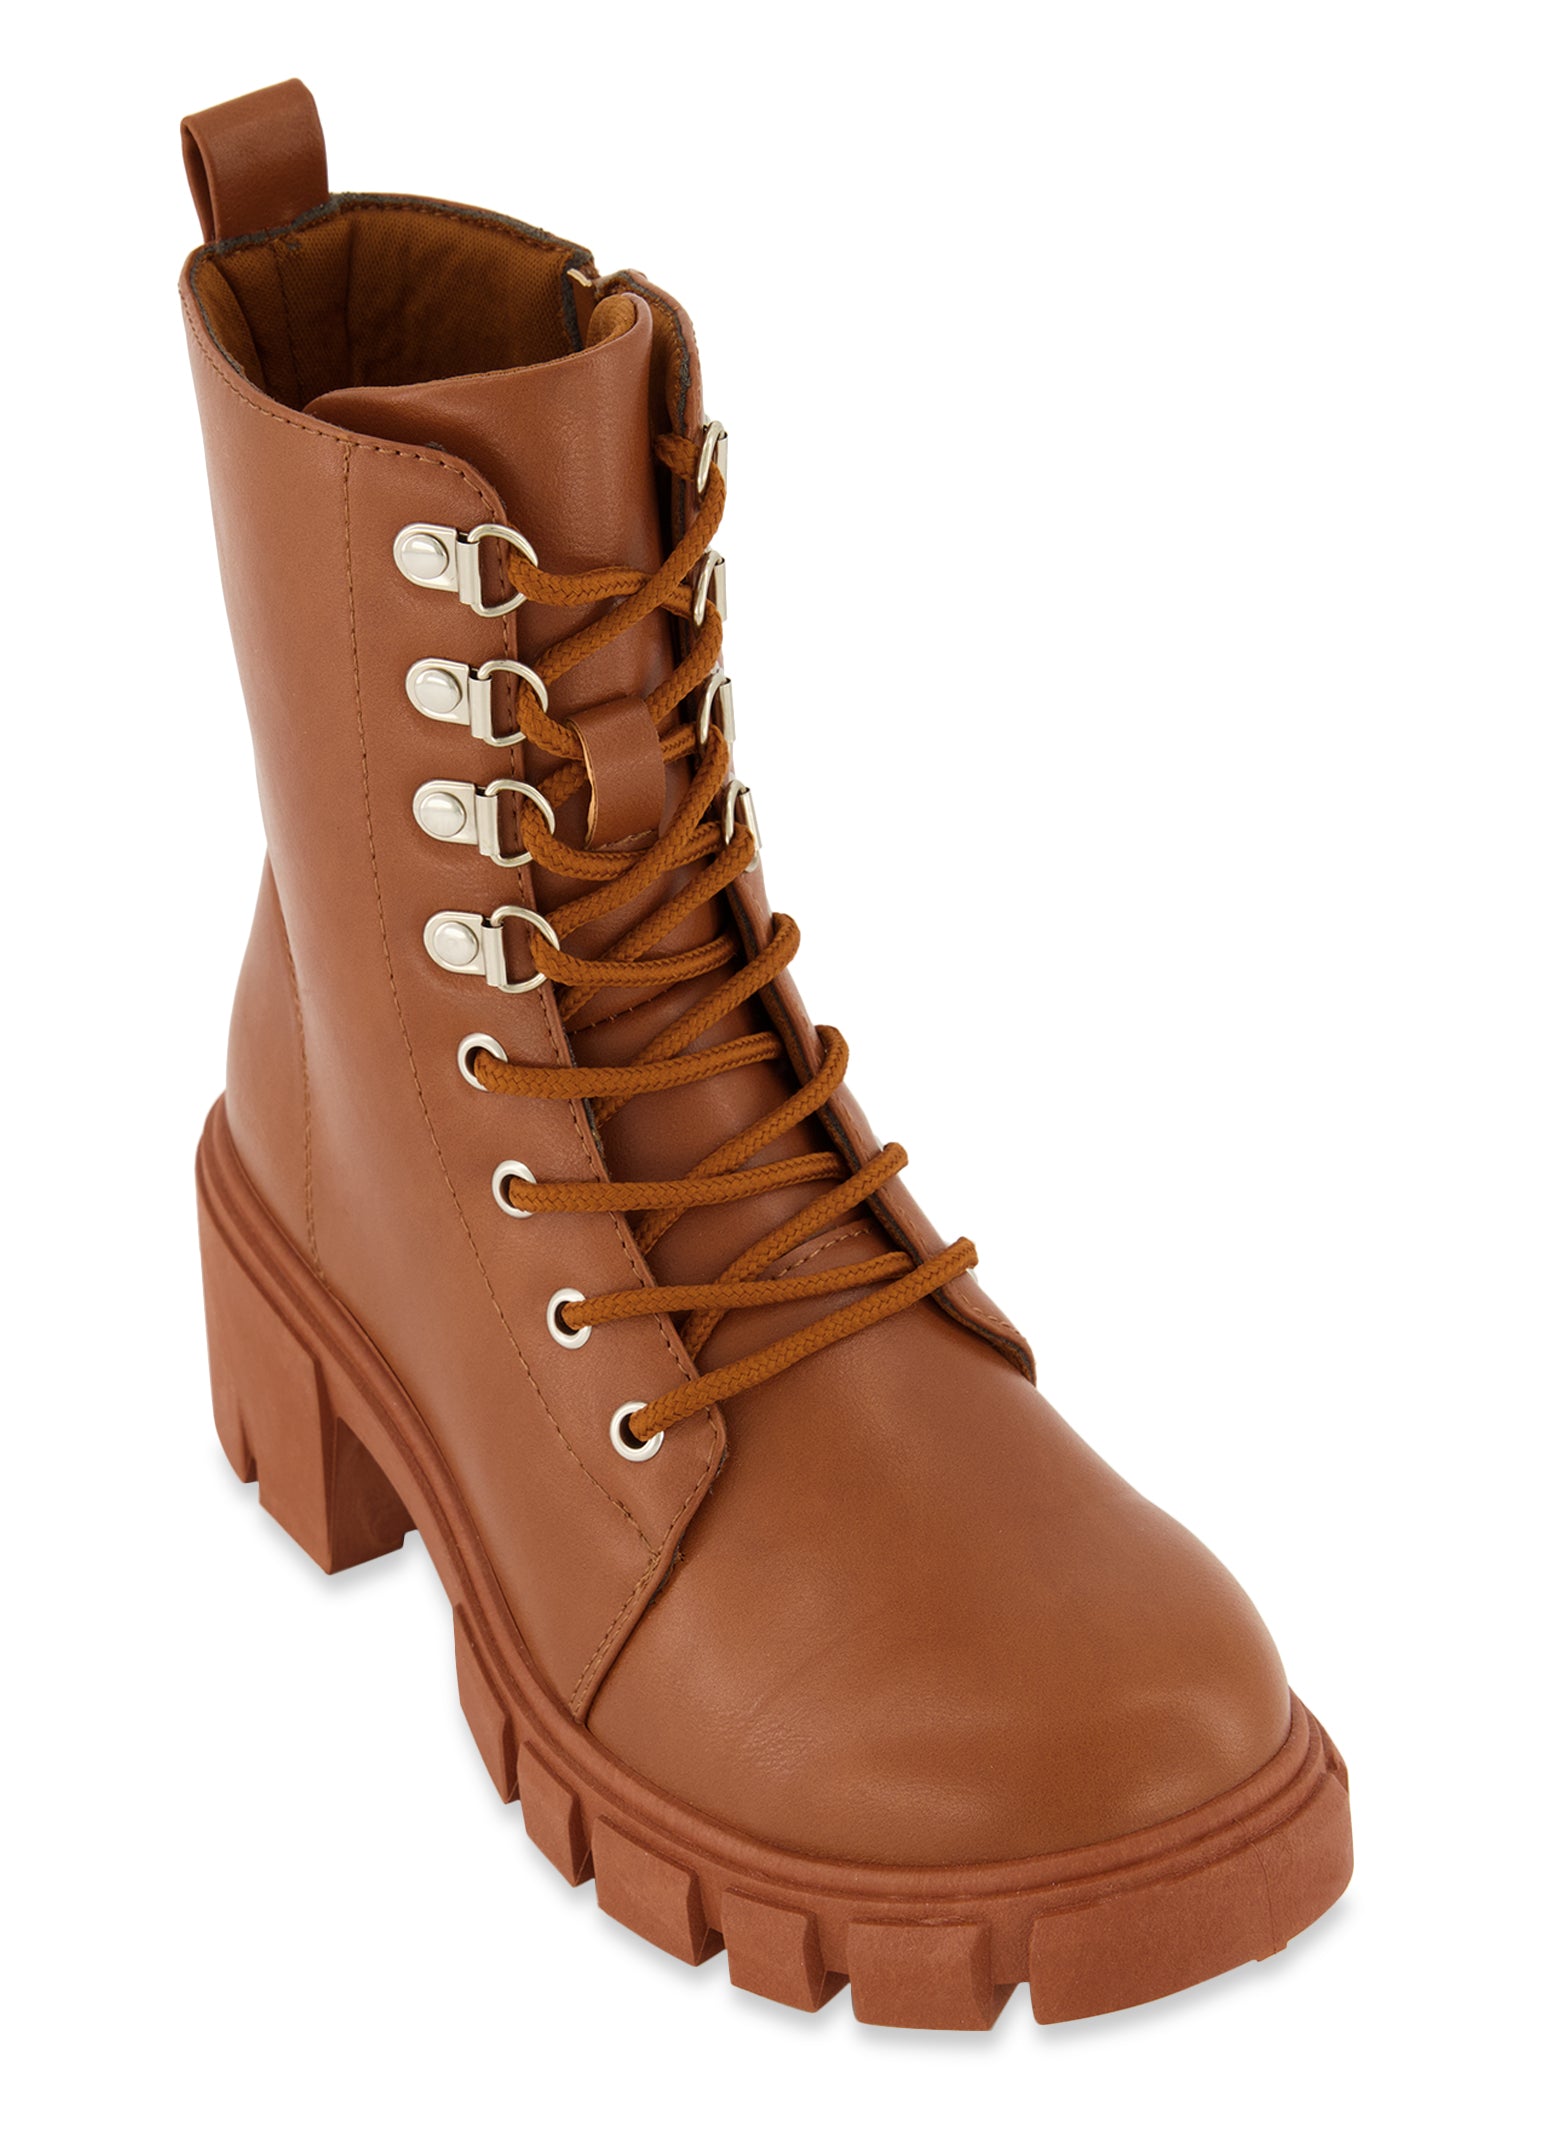 FP Collection Jones Lug Sole Lace Up Boots | The Summit at Fritz